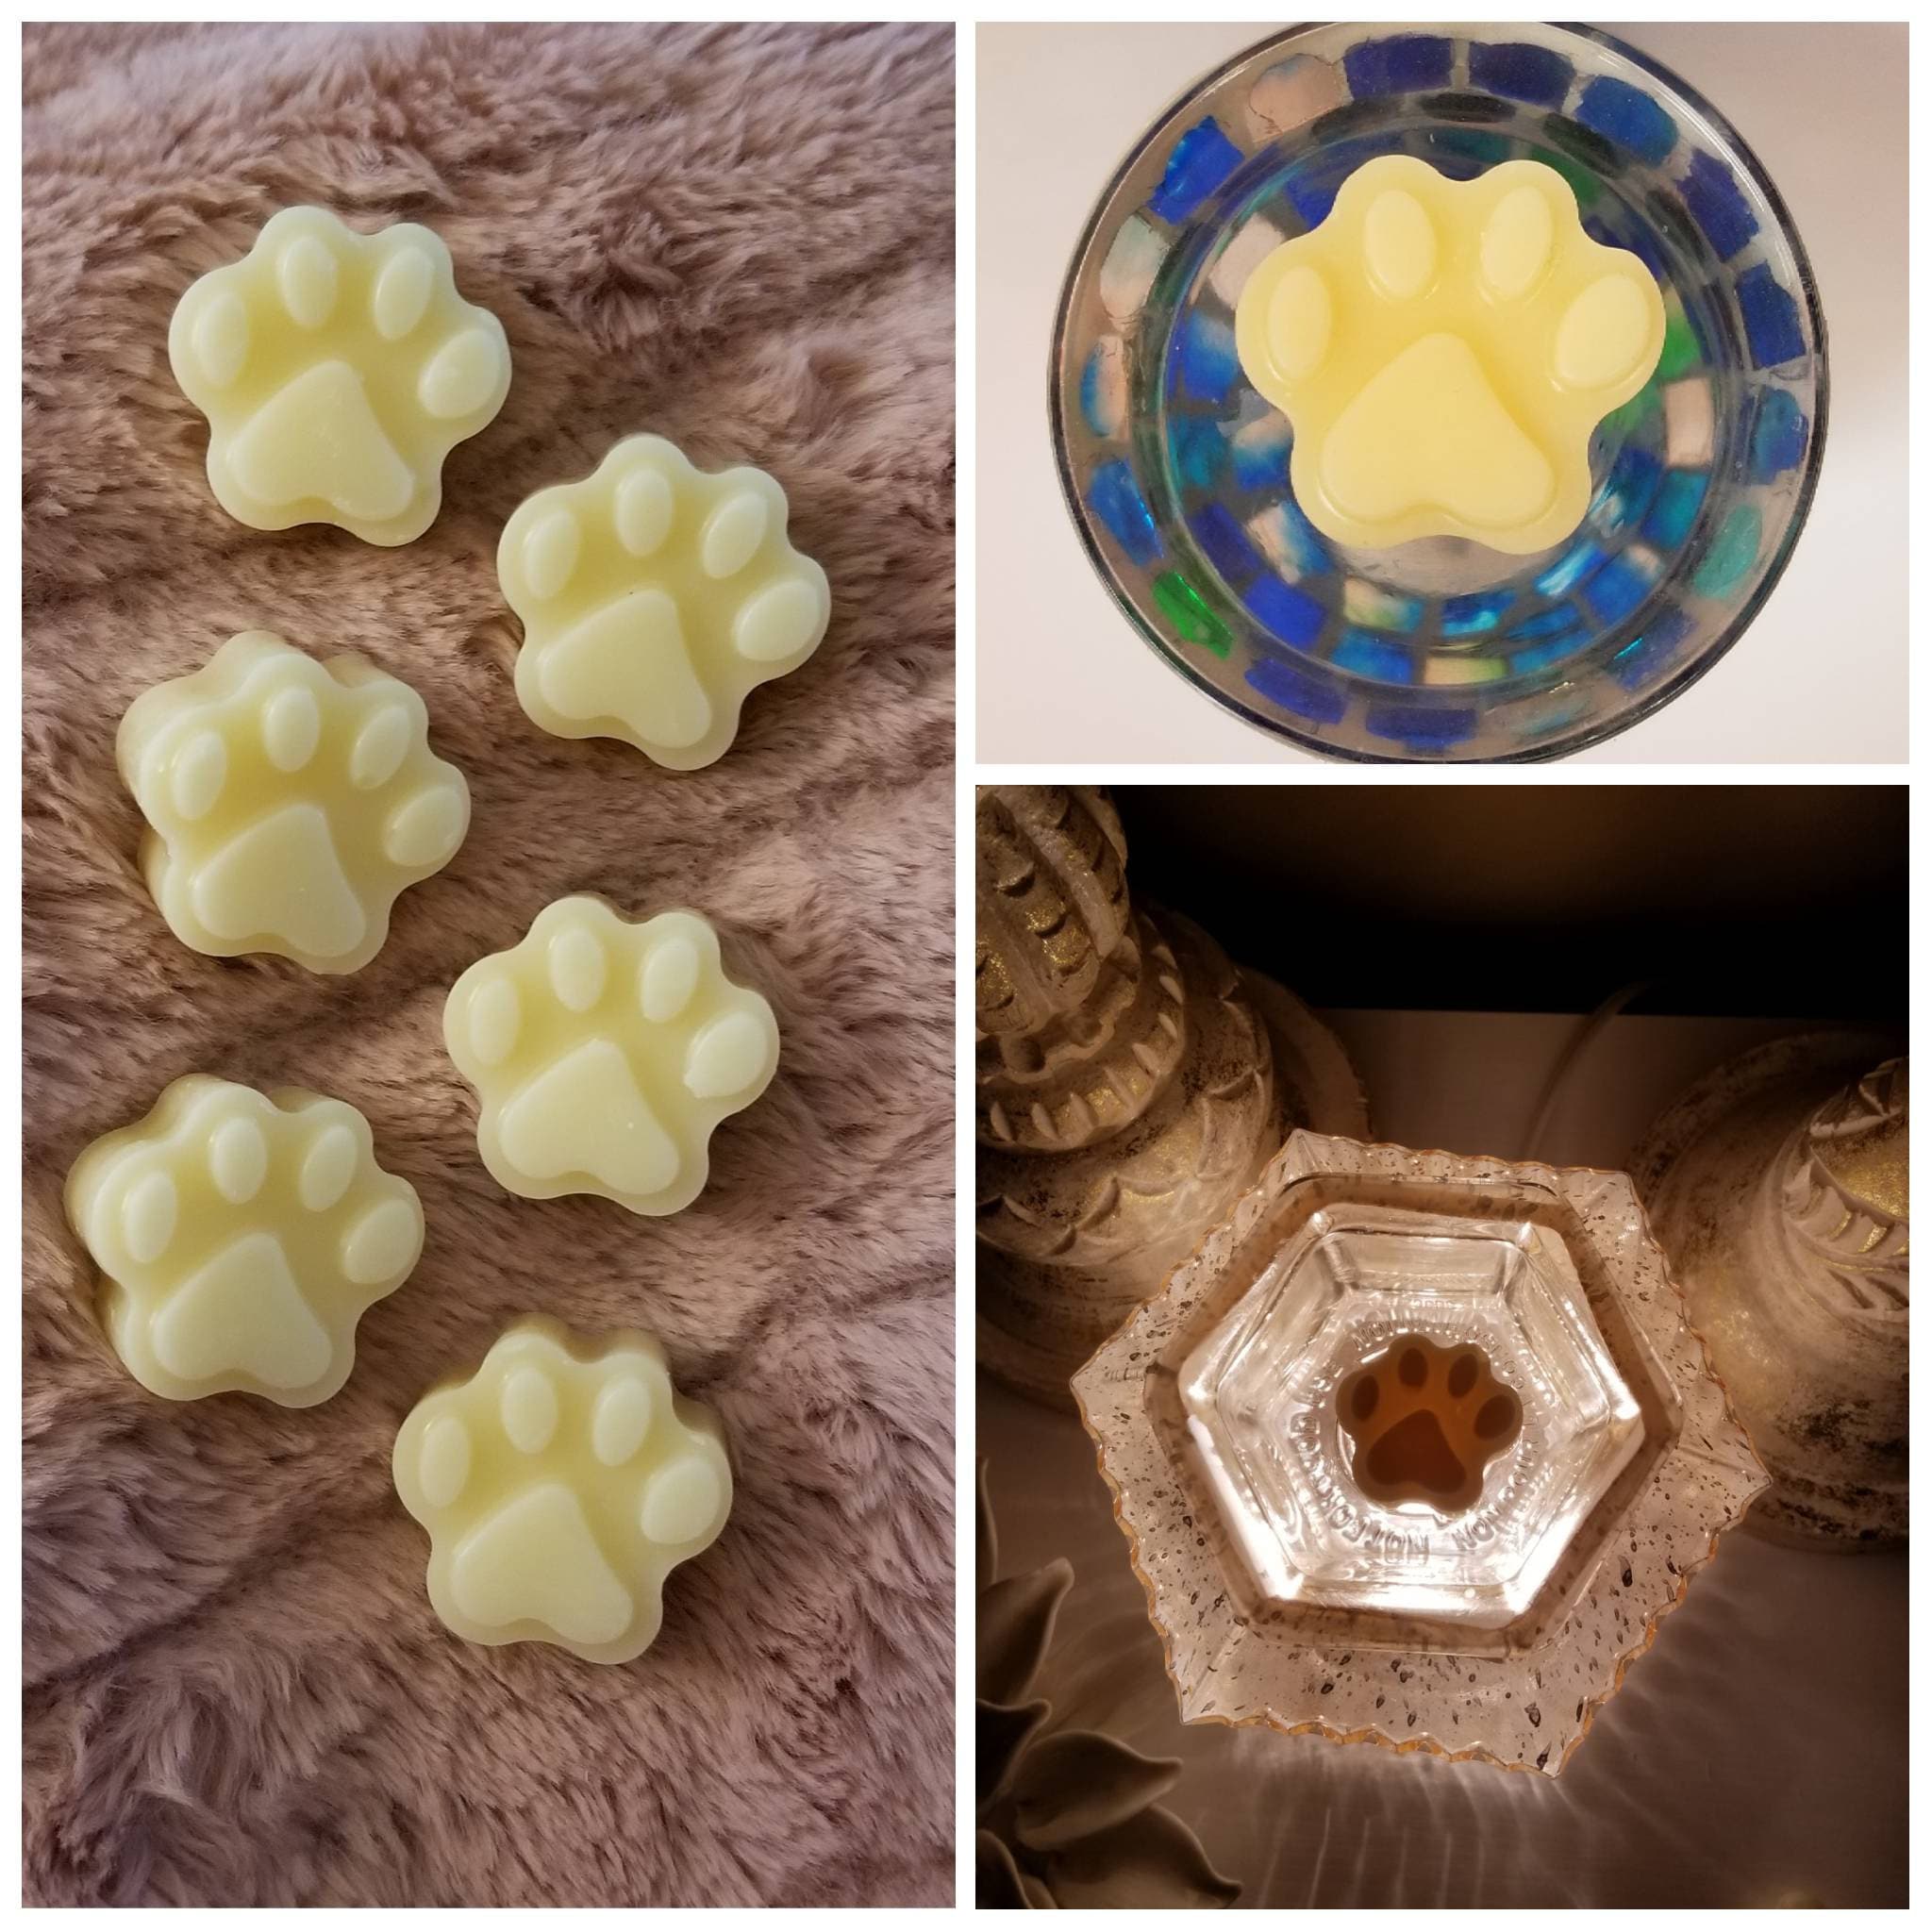 Pure organic Beeswax melts made with local Georgia beeswax in a